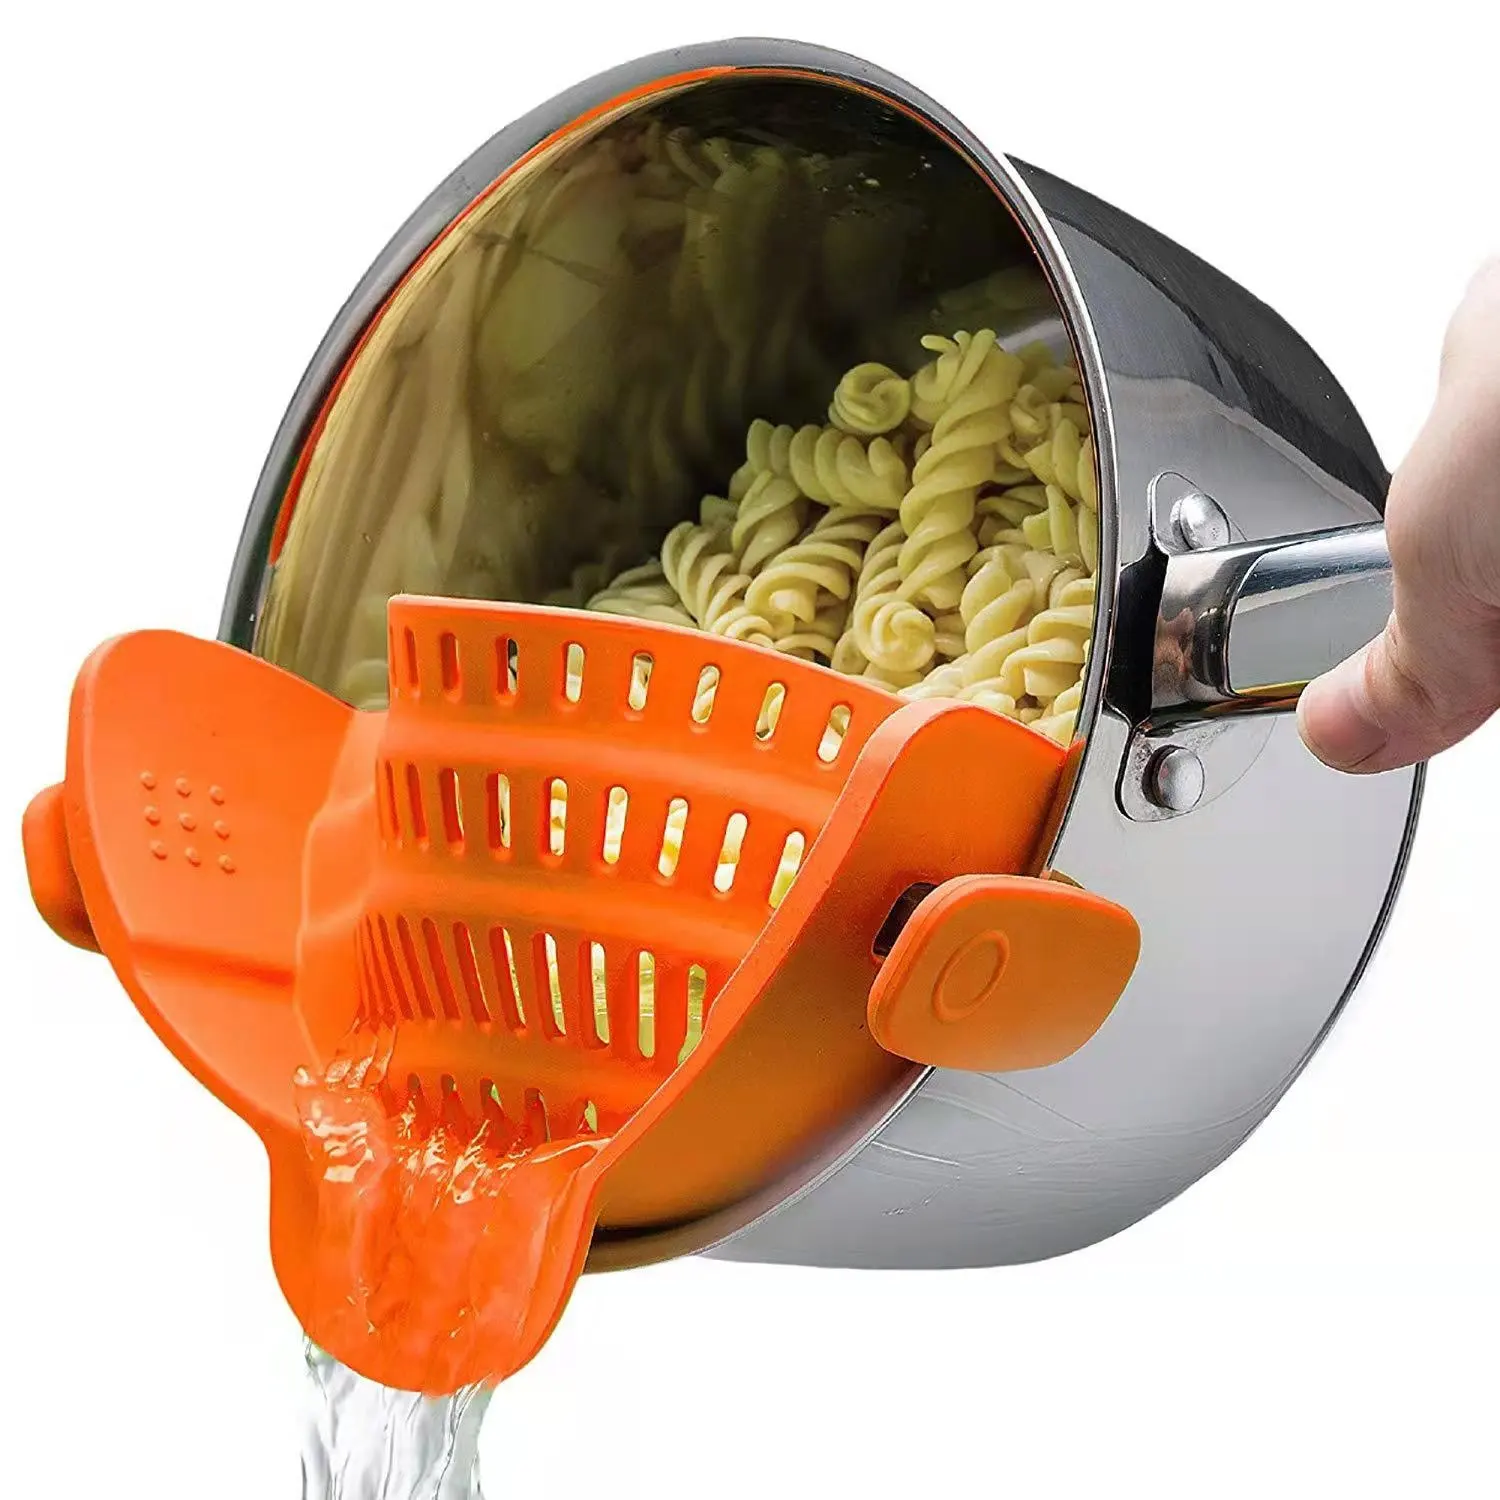 Adjustable silicone clamping strainer suitable for pots silicone food strainers, hands-free drains, kitchen tools